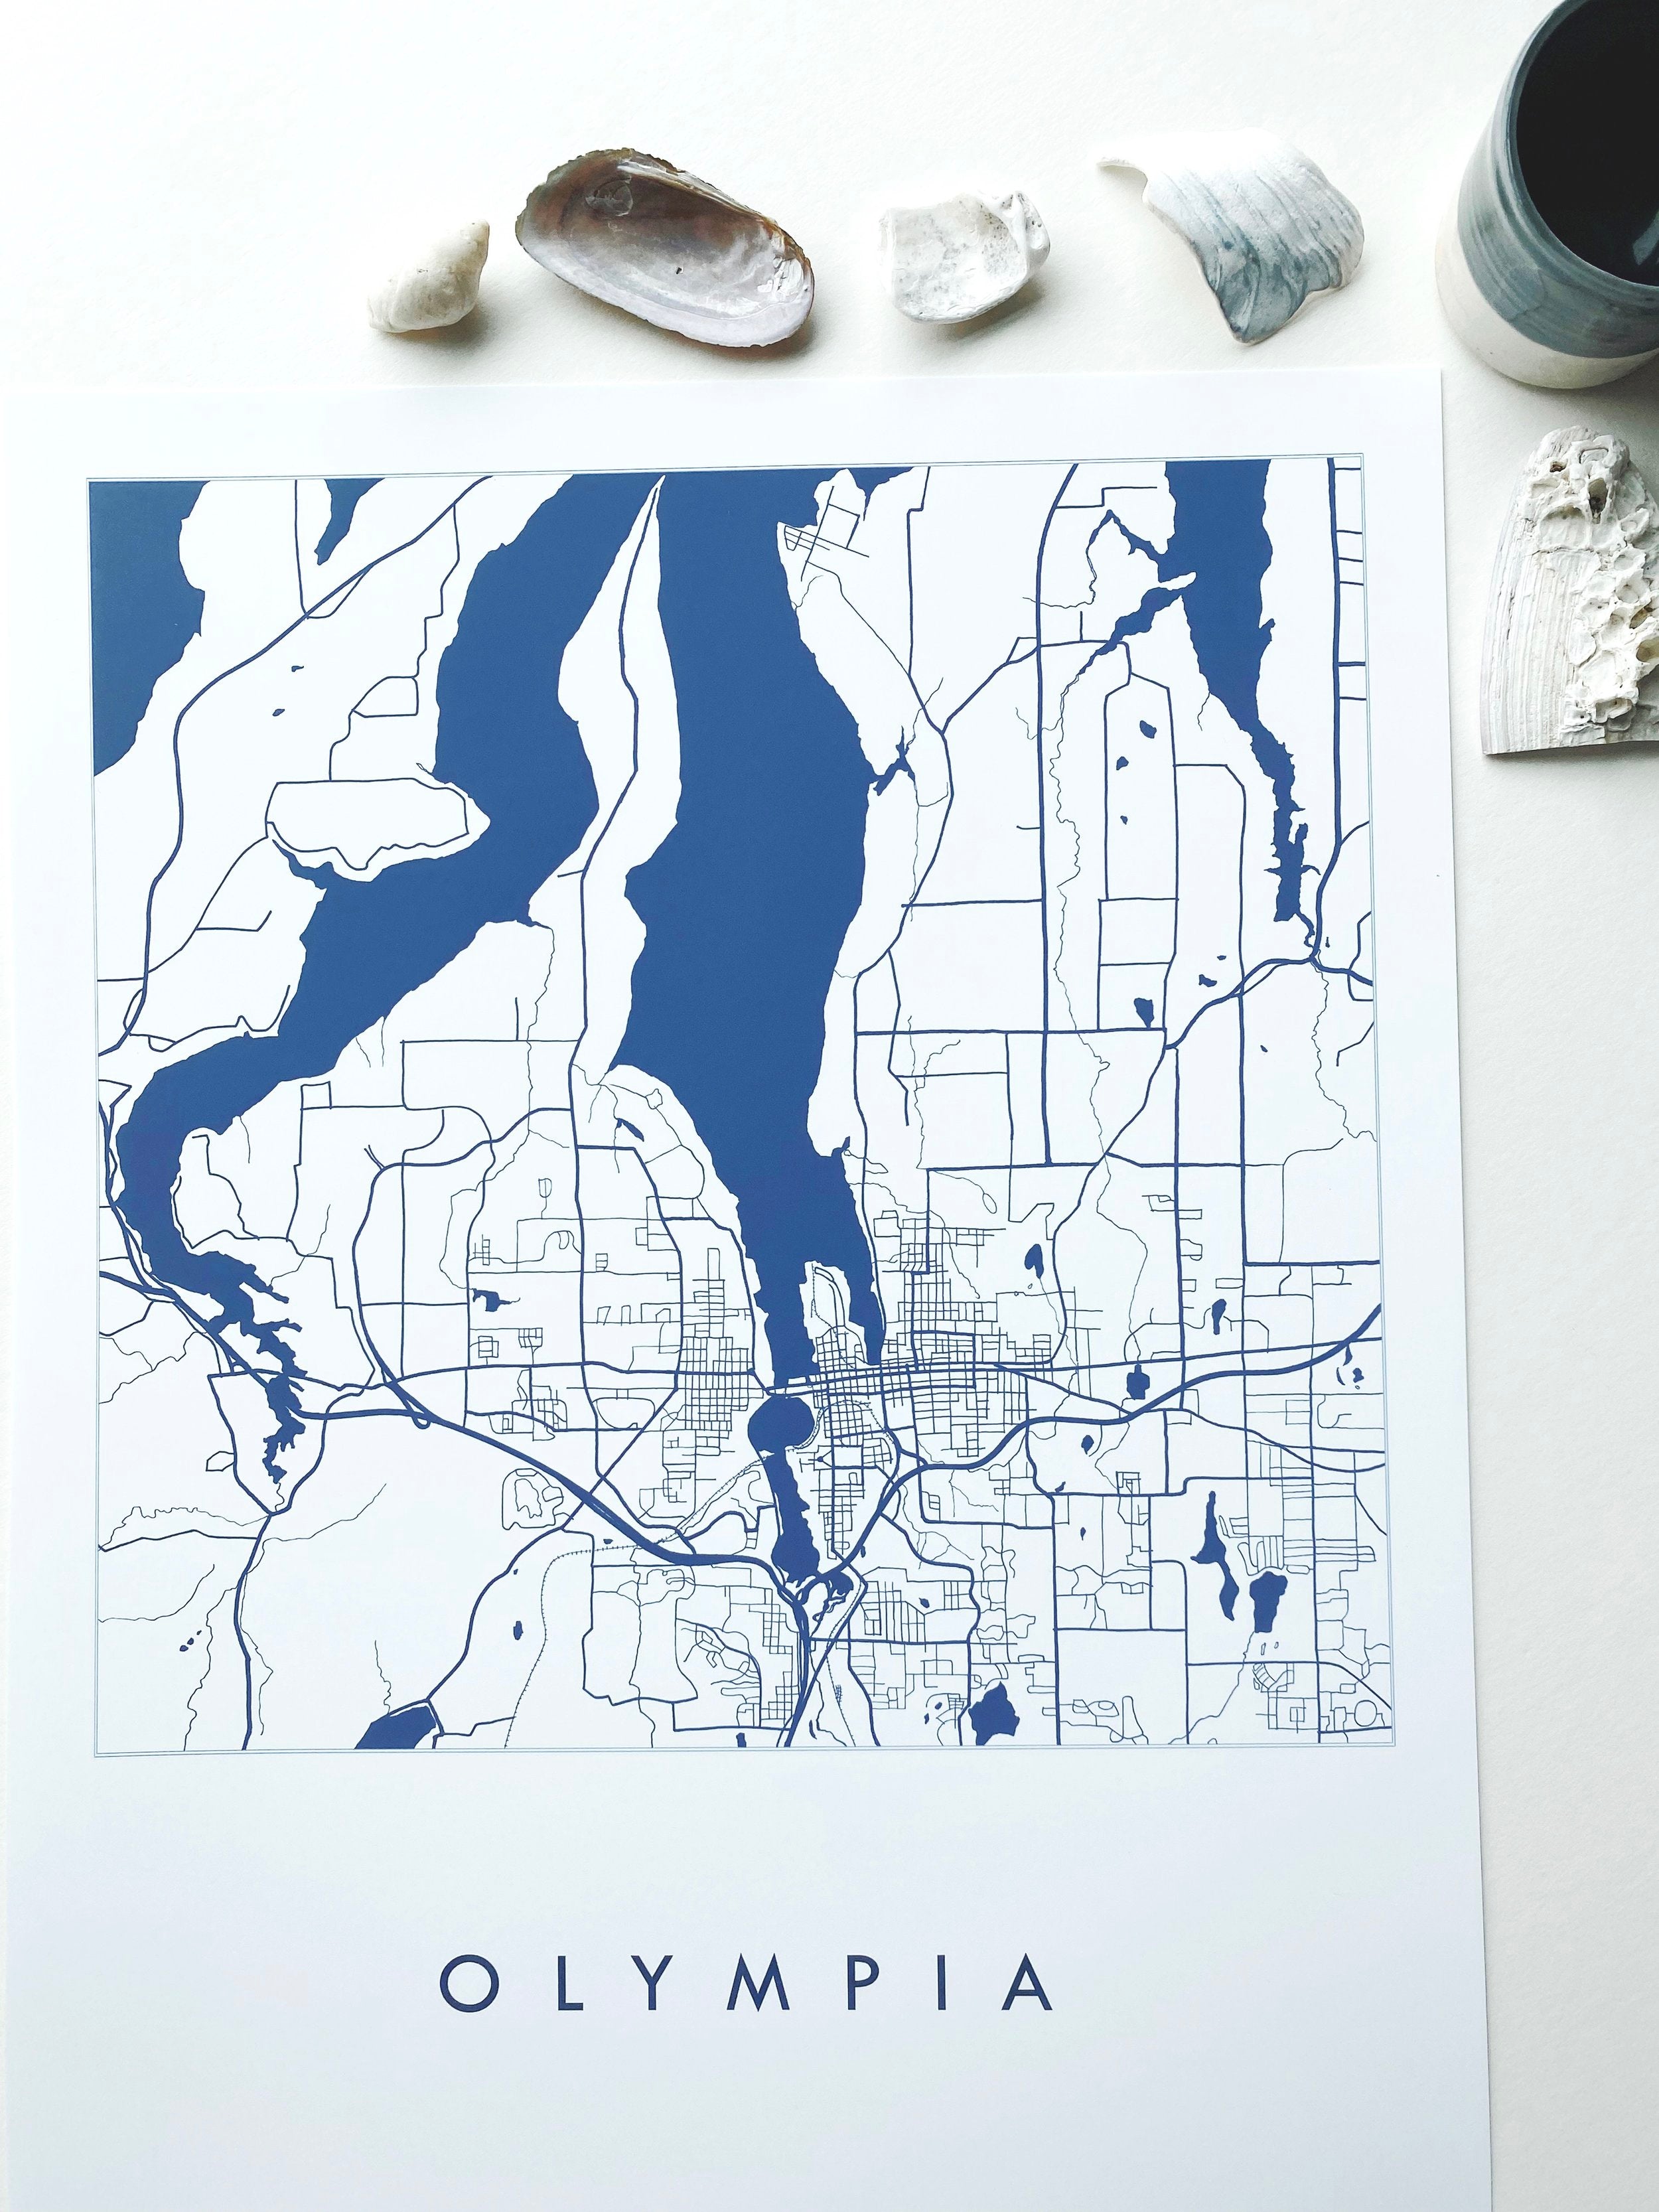 Greater OLYMPIA "Blueprint" Map: PRINT